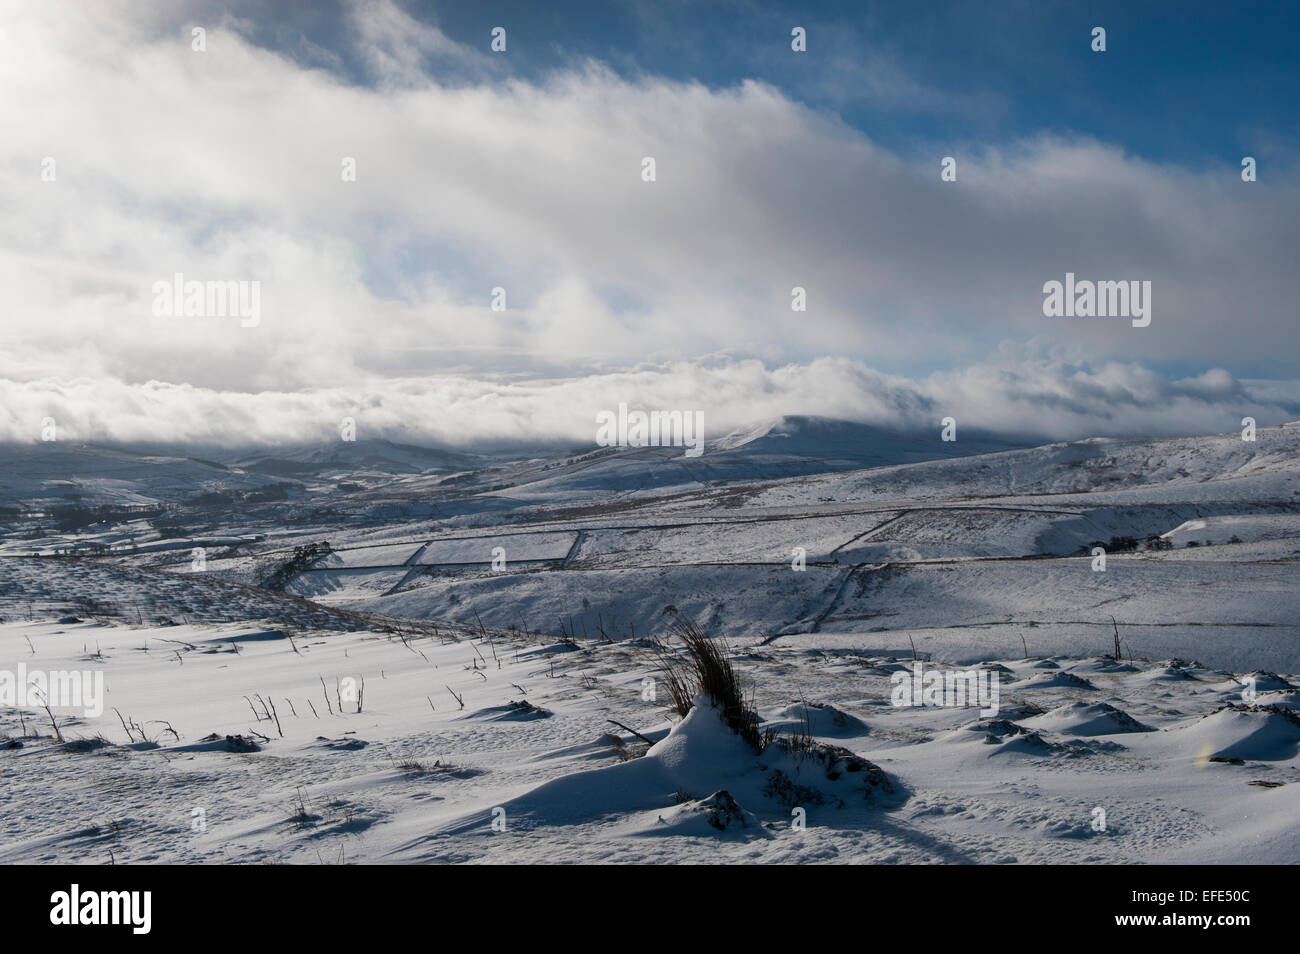 Clouds sweeping over upper Wensleydale hills following a snow storm, UK. Stock Photo